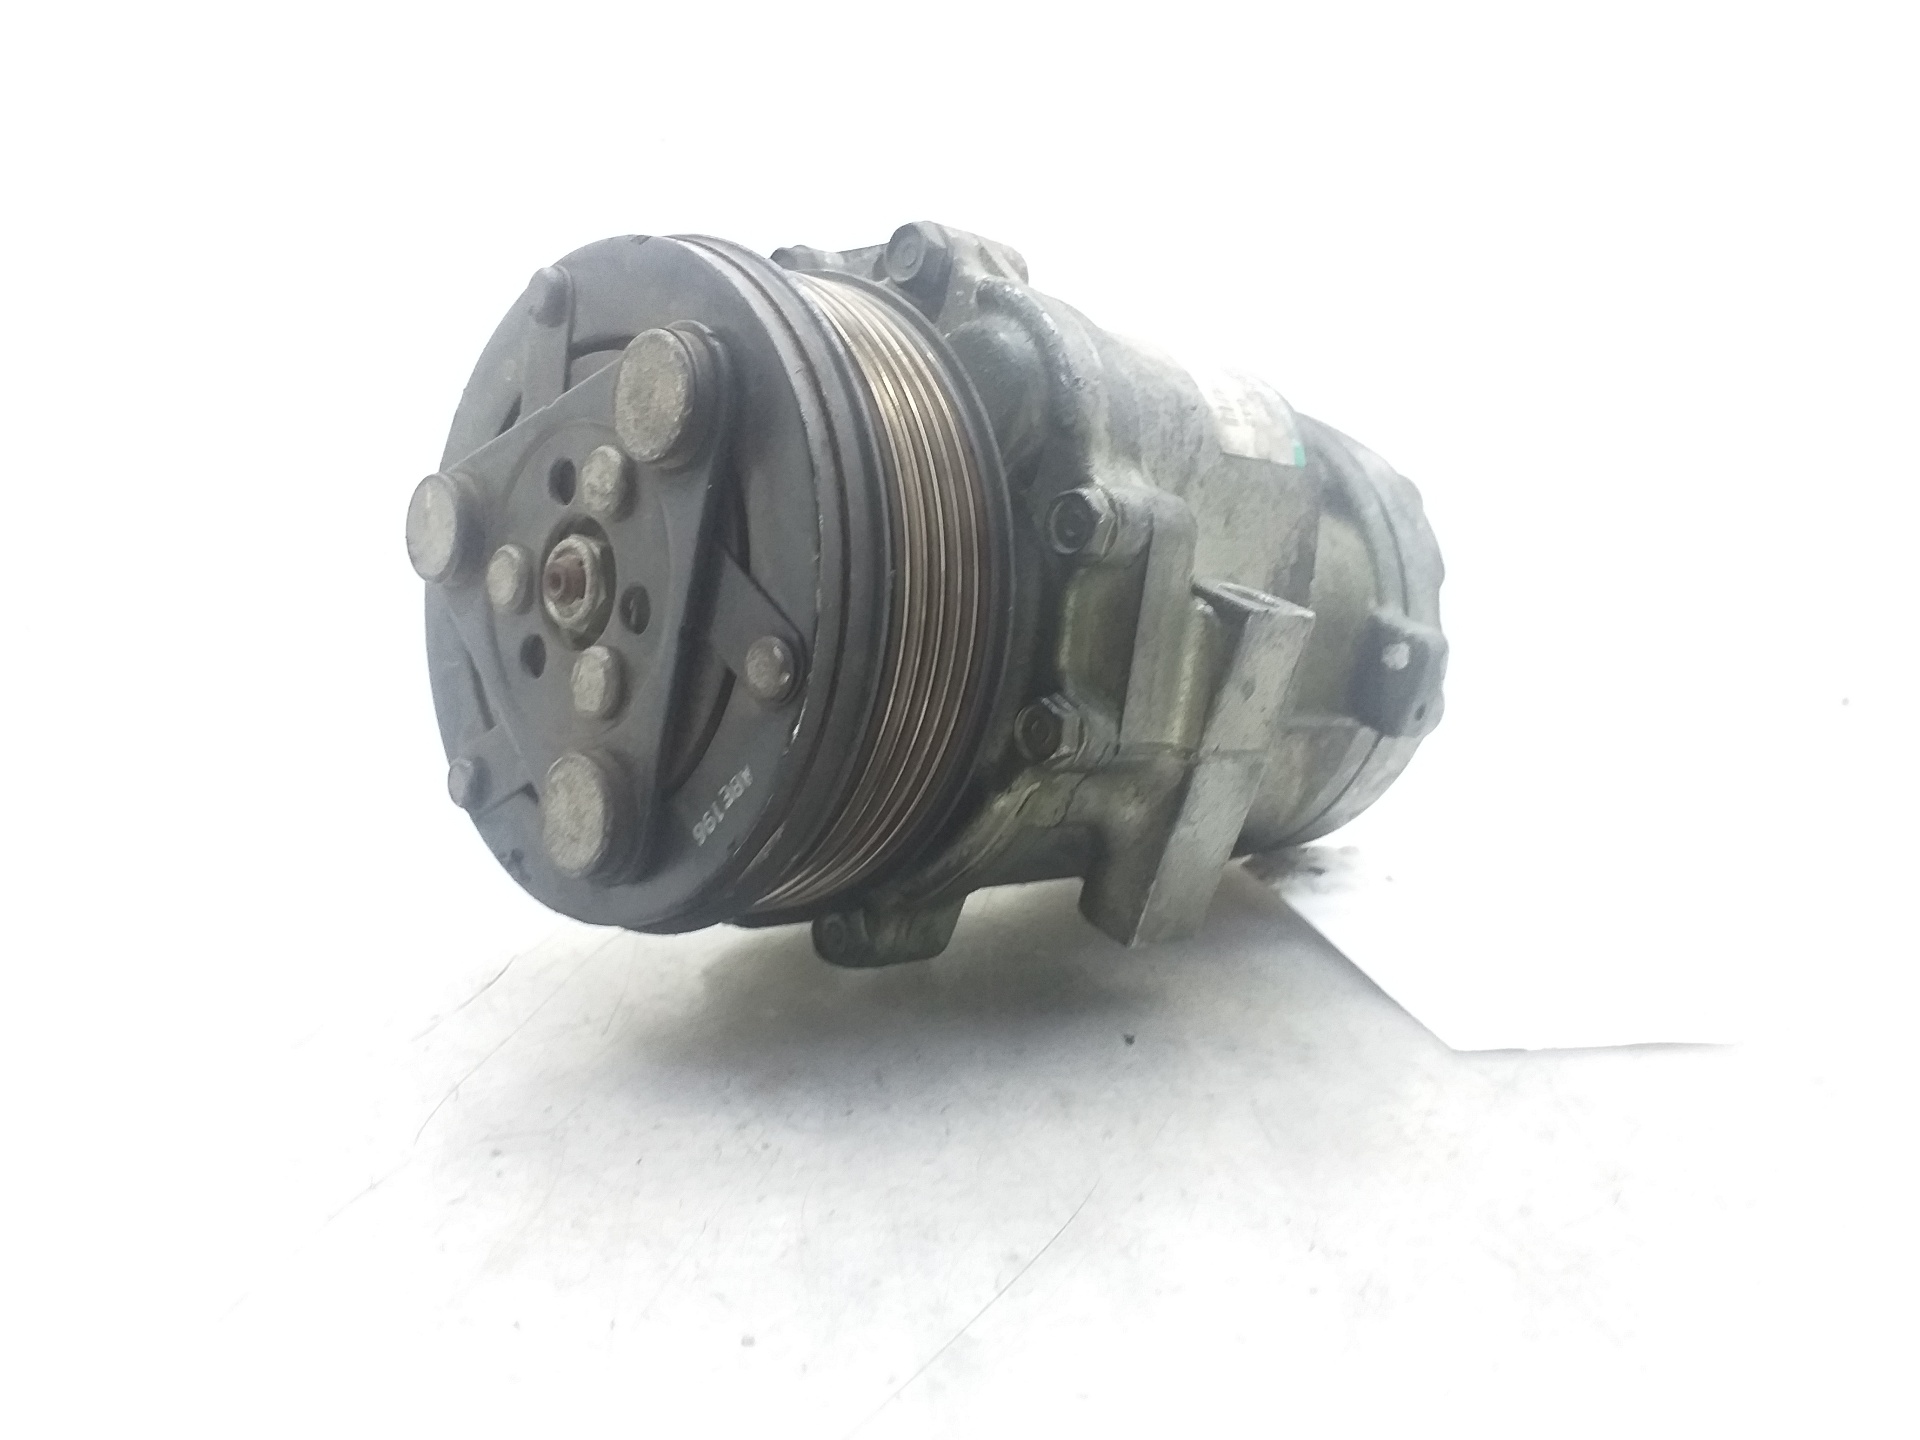 OPEL Combo C (2001-2011) Air Condition Pump 24421642 22029797